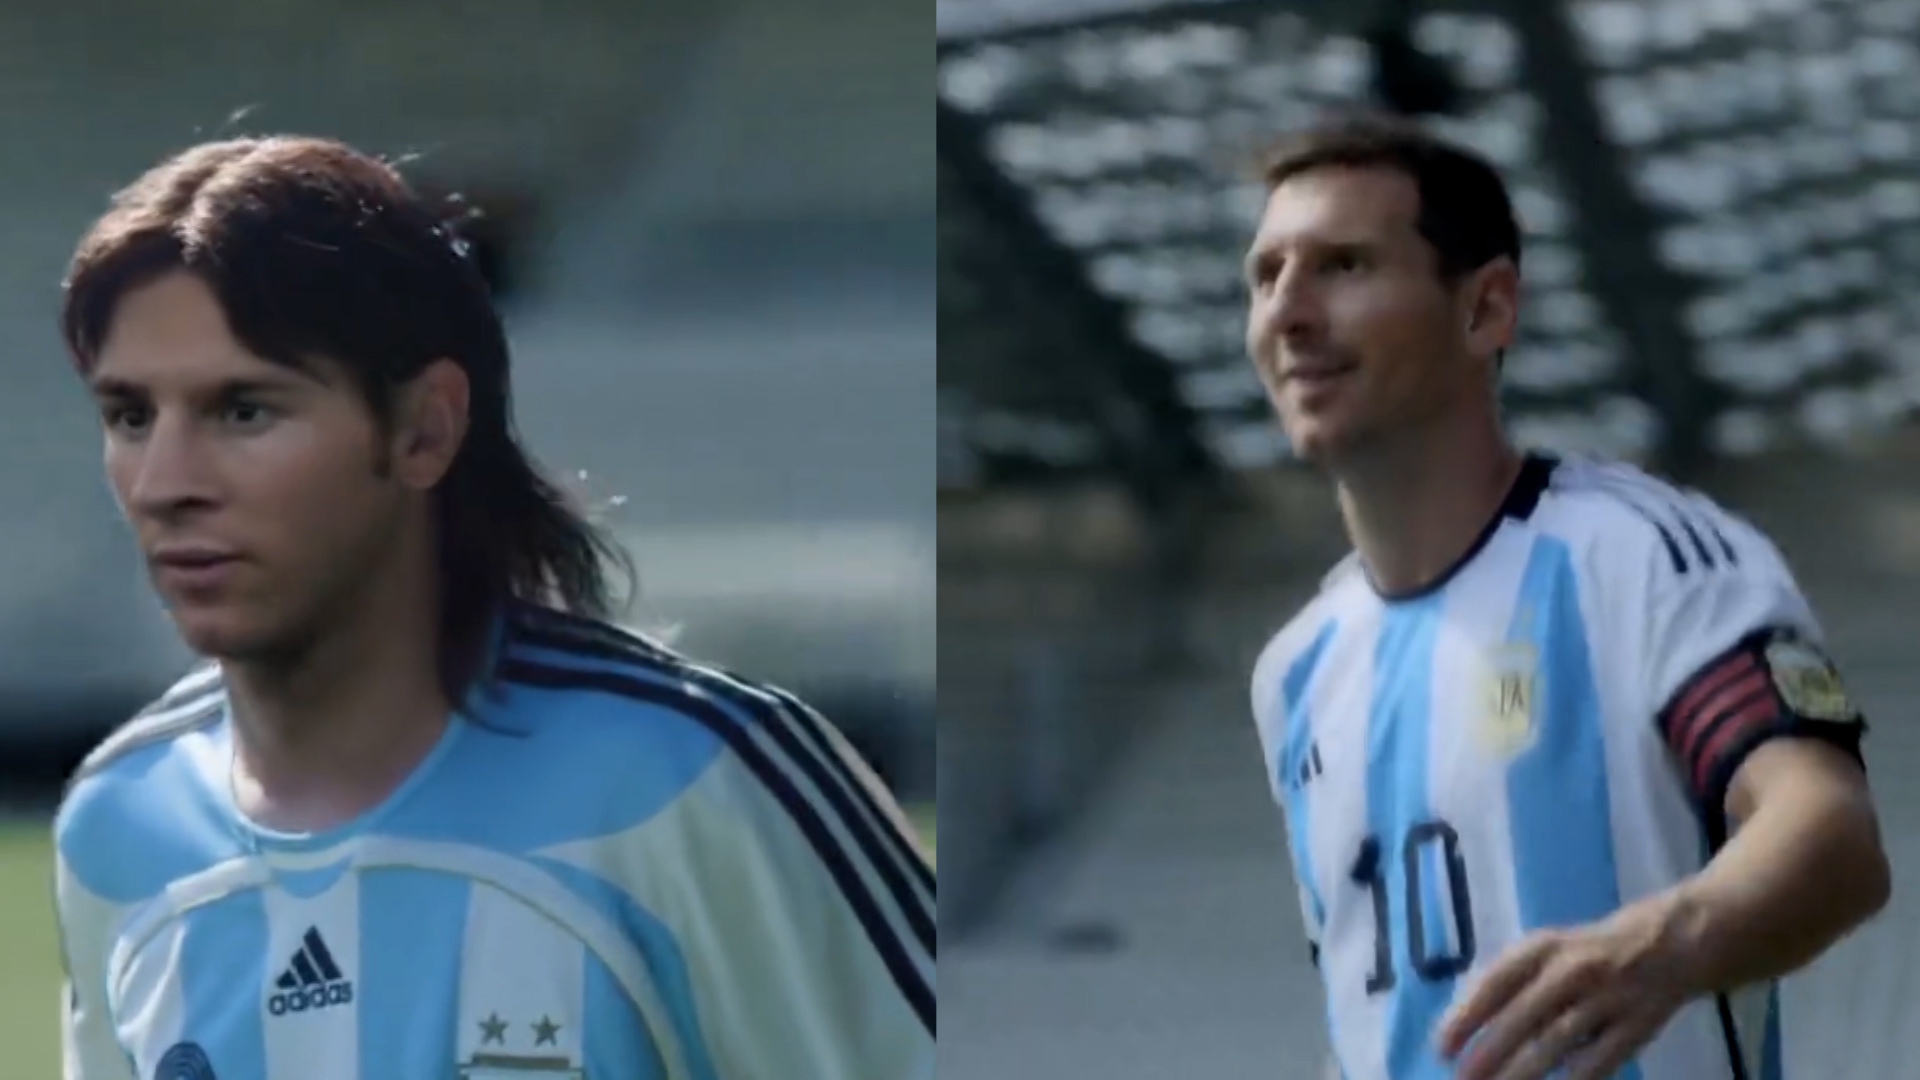 Messi plays against his younger self in latest Adidas advert